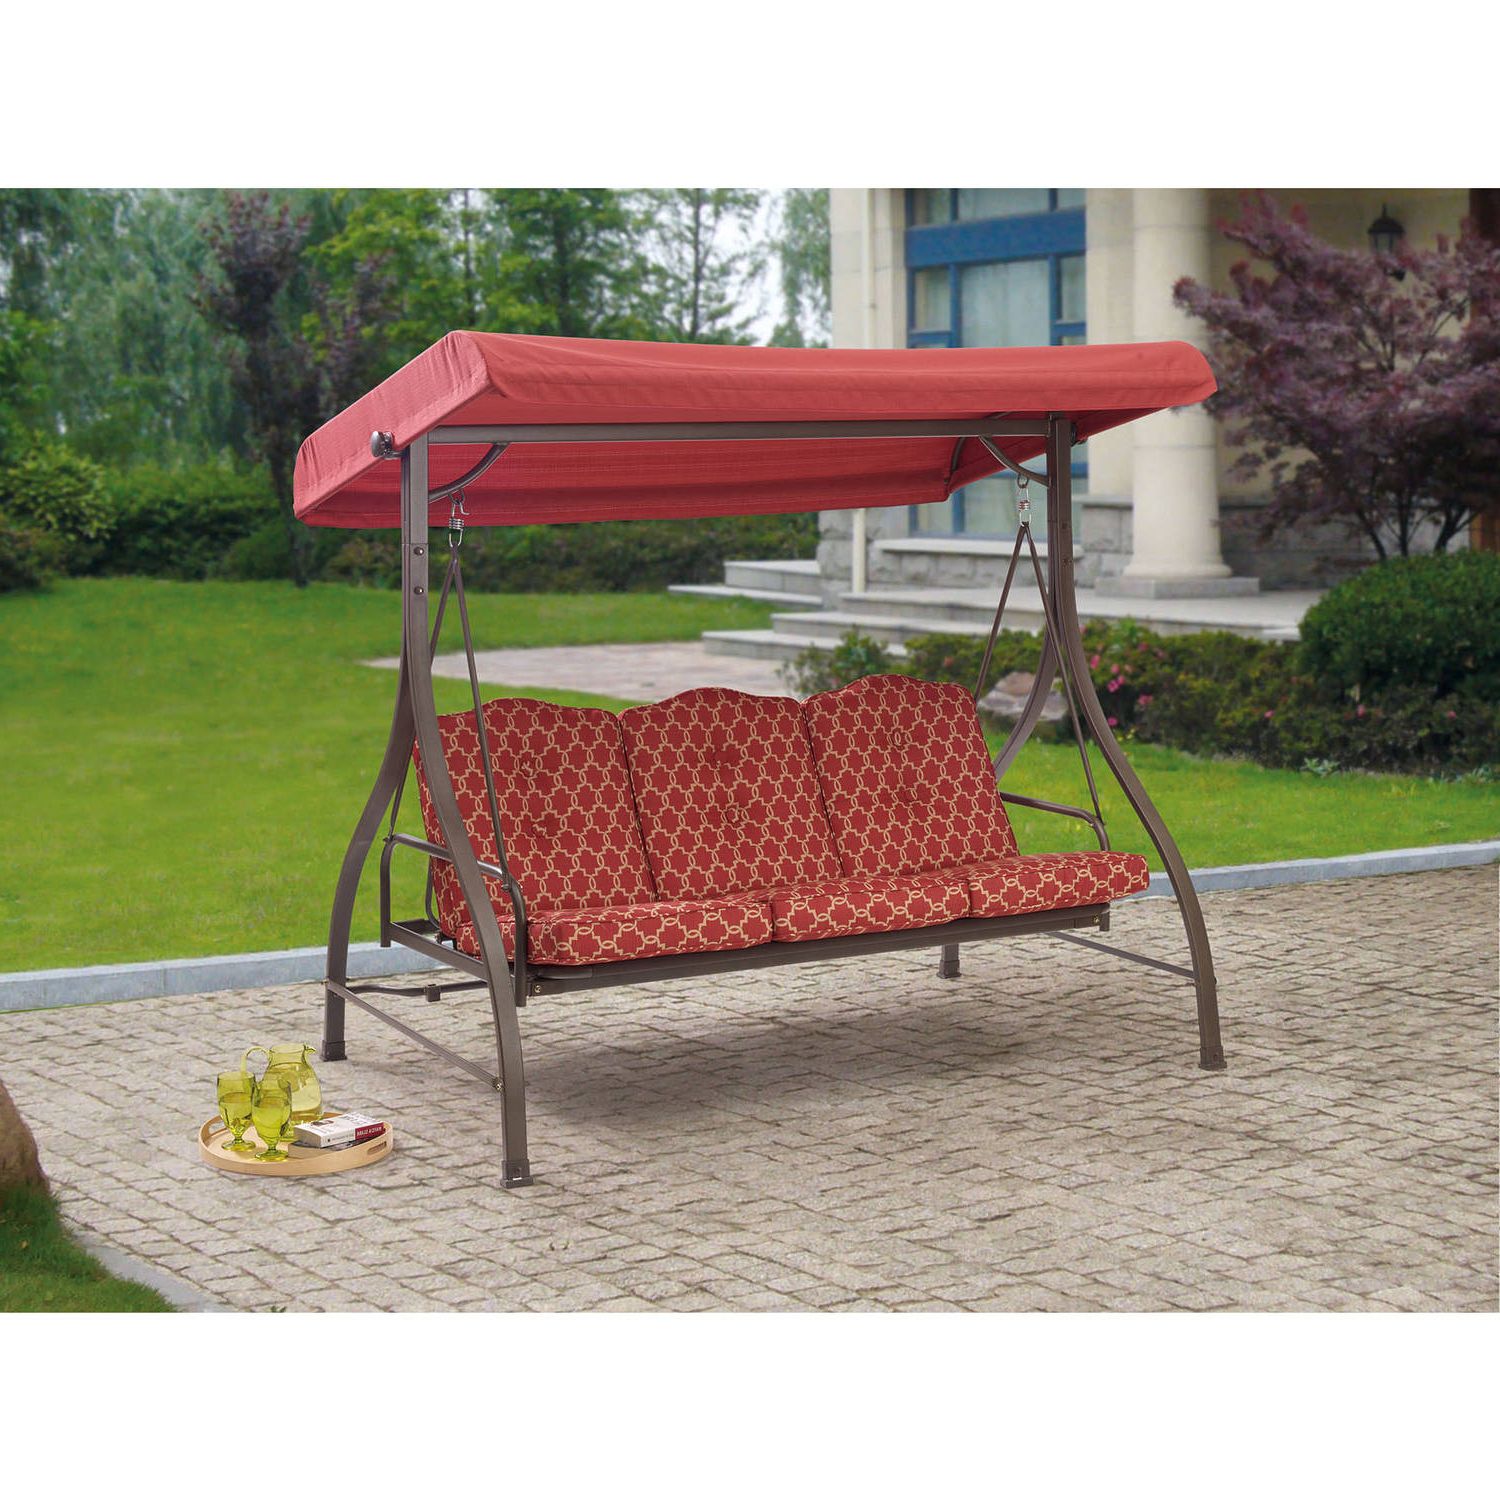 3 Seats Patio Canopy Swing Gliders Hammock Cushioned Steel Frame Inside 2019 Outdoor: Cozy Outdoor Swing Cushions For Your Patio (View 24 of 30)